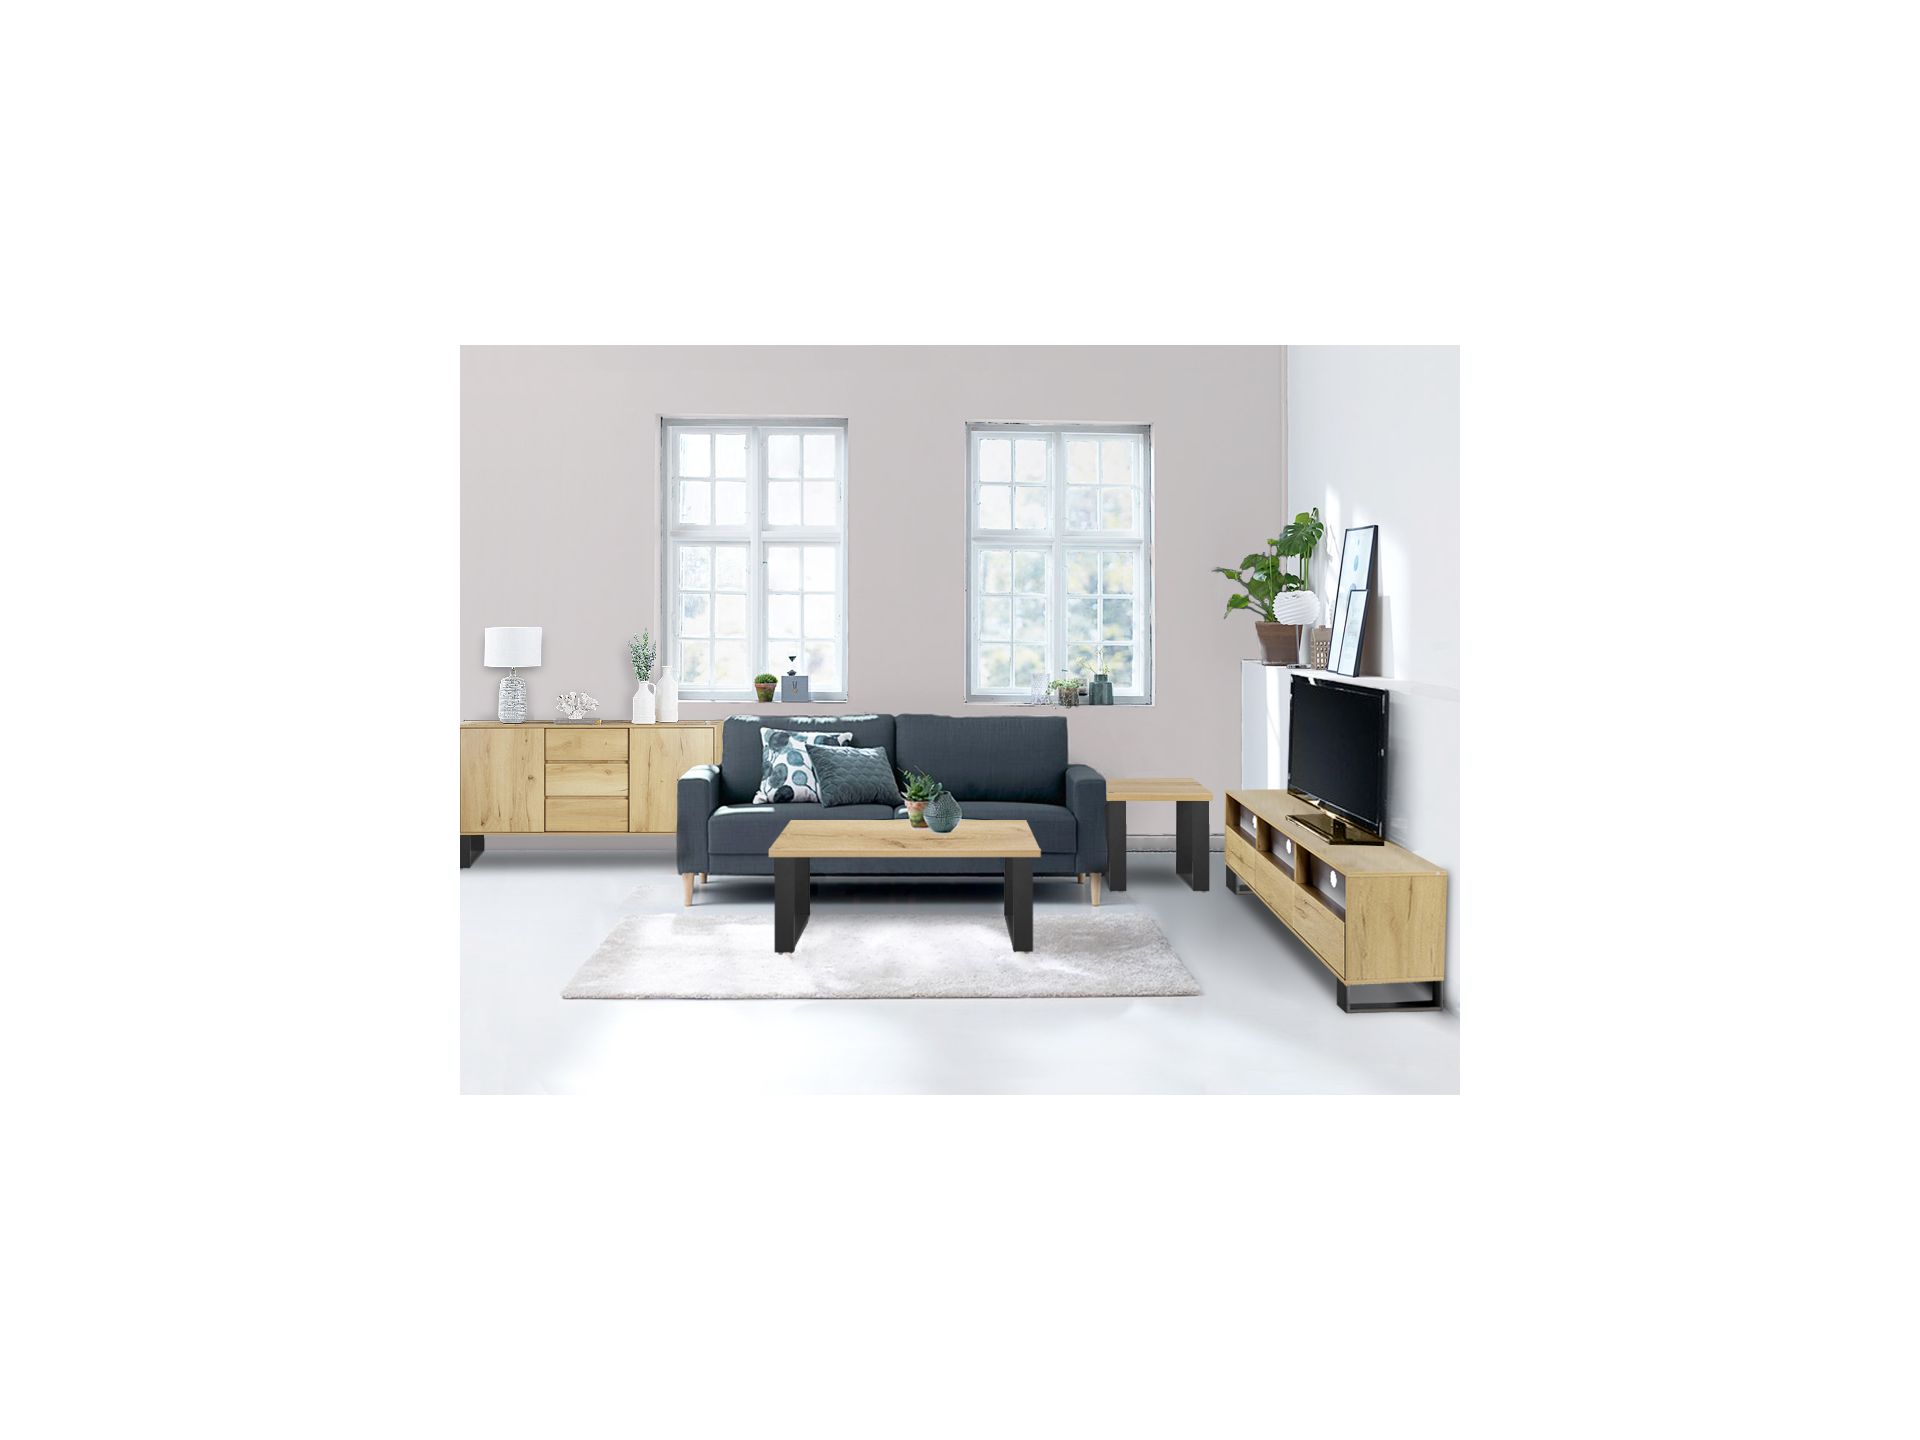 Frohna 4 Piece Living Room Furniture Package - Oak